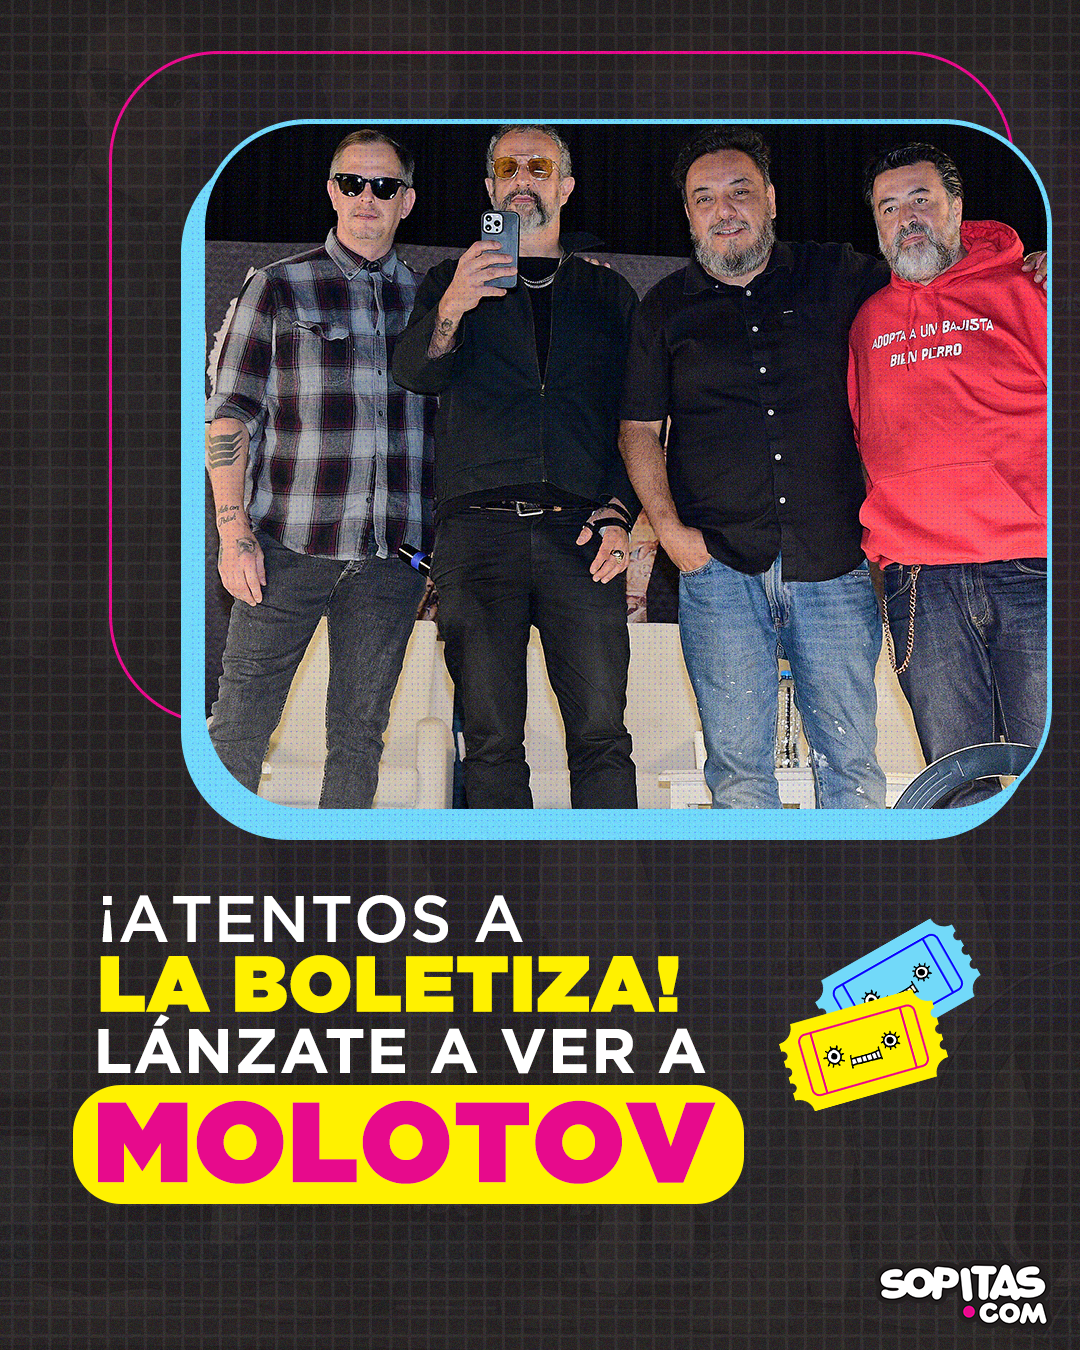 We give you free tickets for the Molotov concert at Foro Sol 